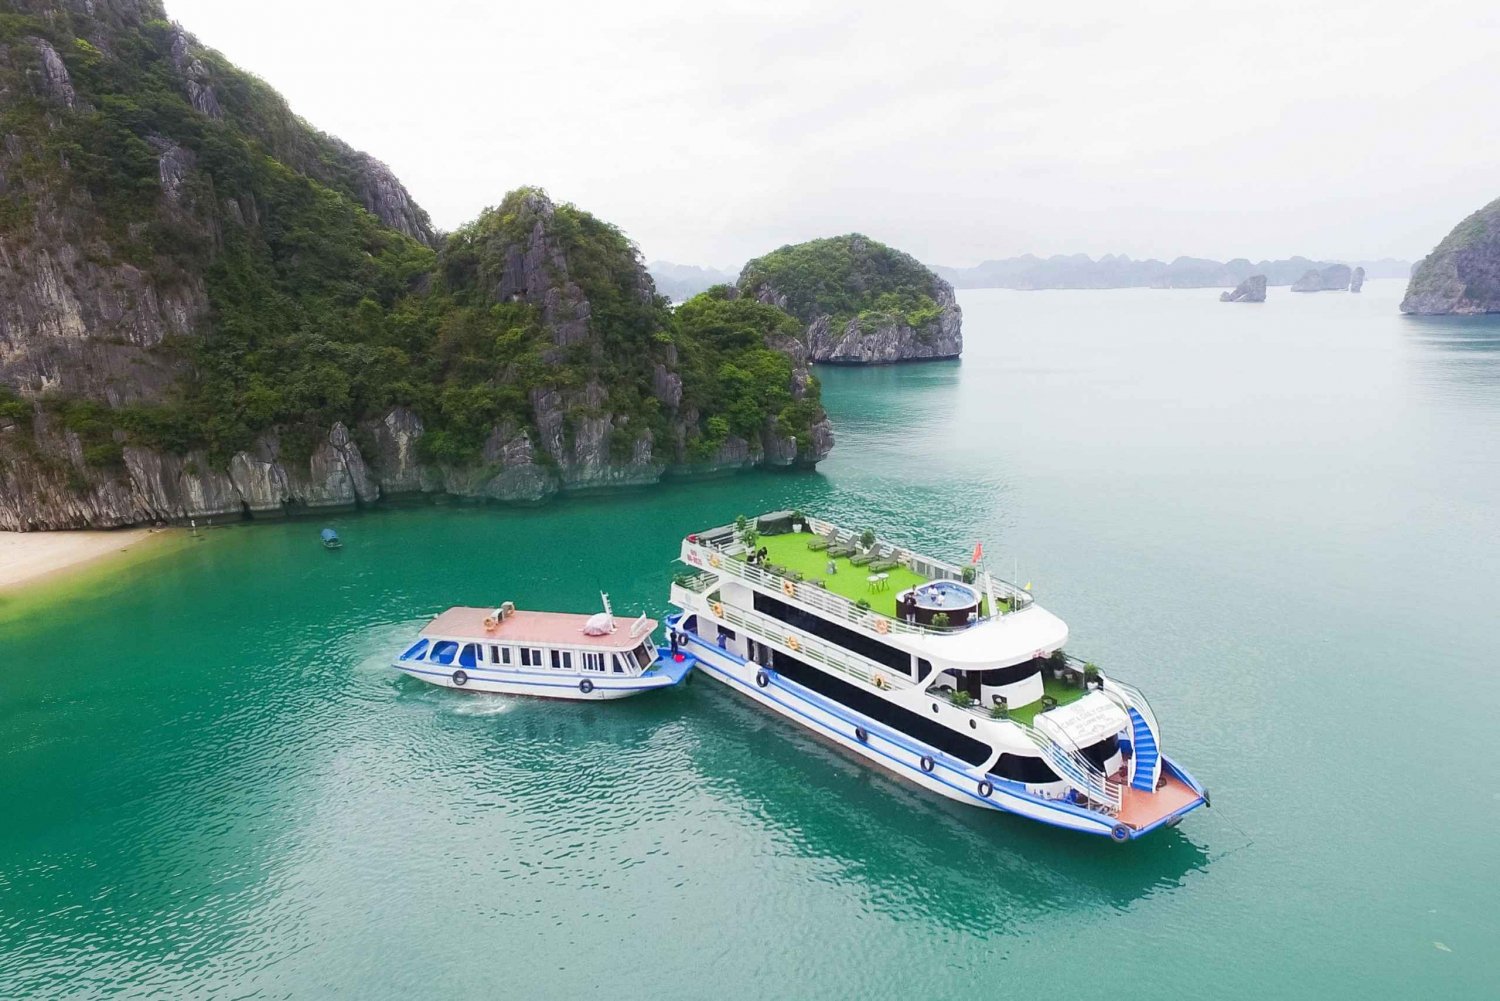 La Casta Cruise - Luxury Day Tour in Halong Bay From Harbor